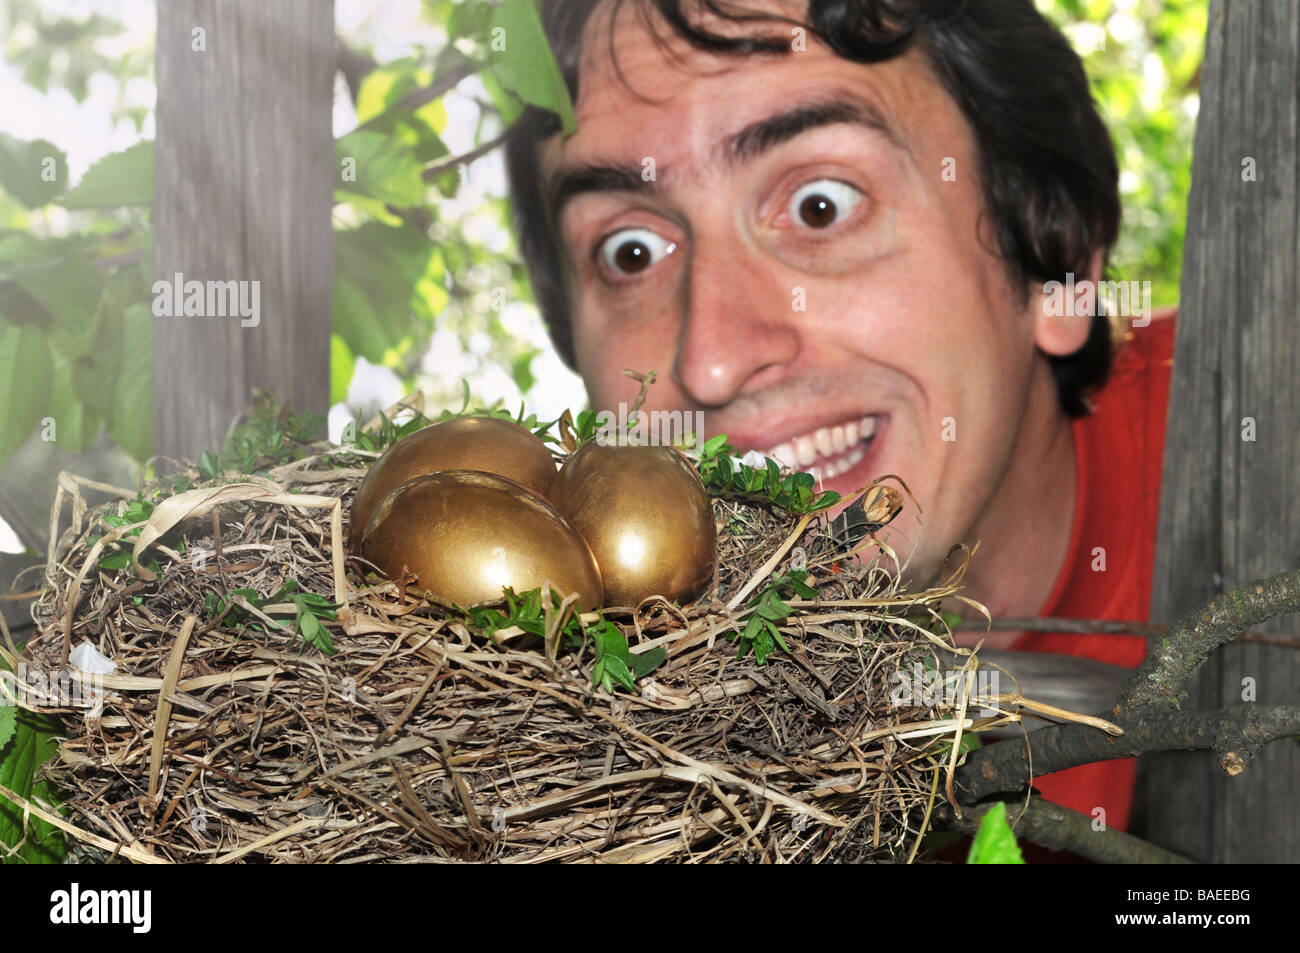 Happy surprised man on a ladder finding nest full of golden eggs. Stock Photo